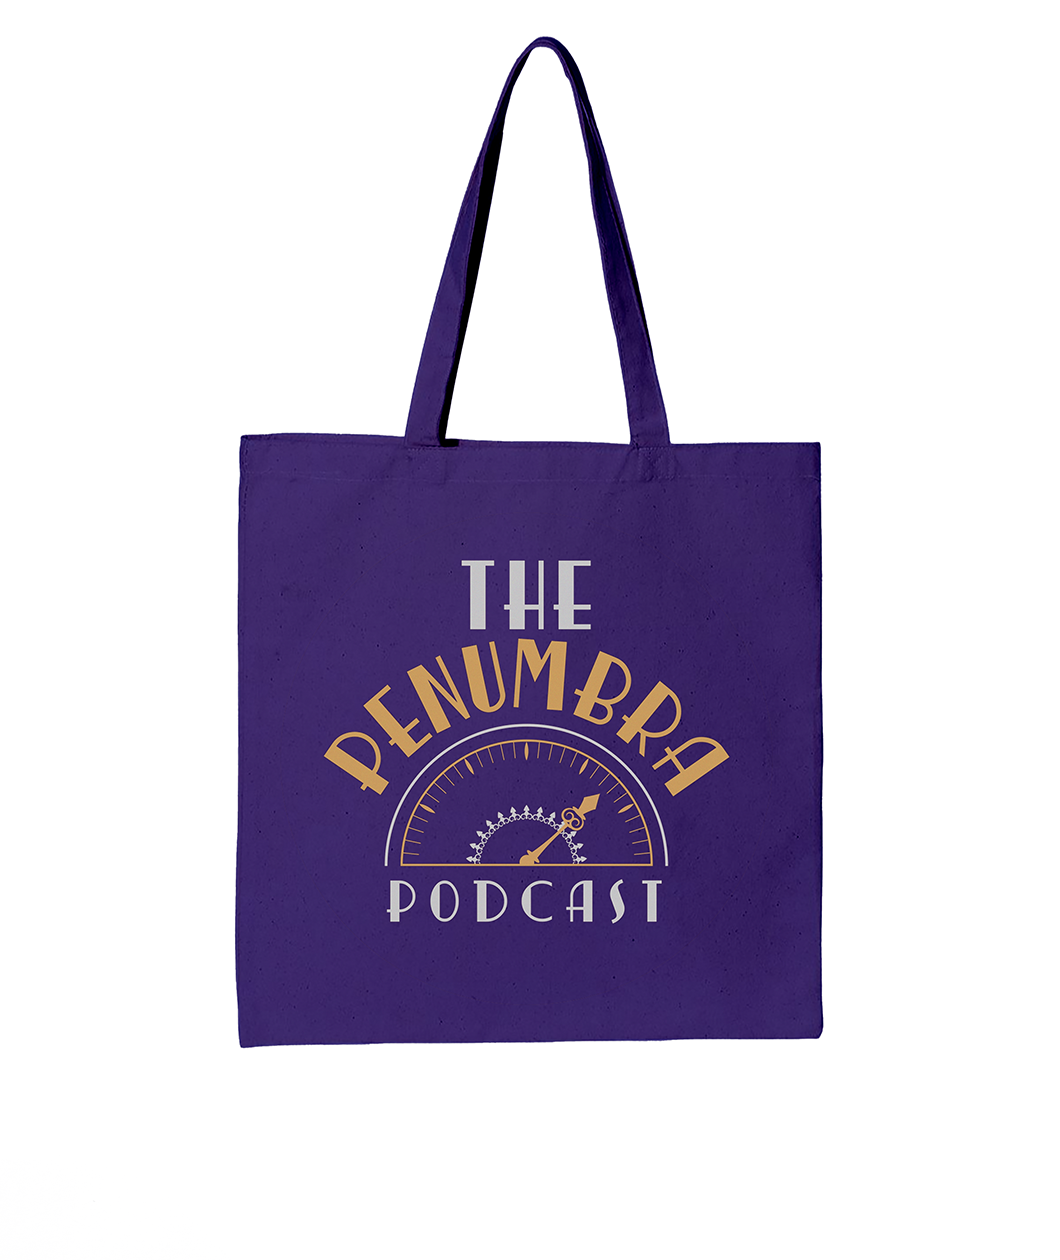 A purple tote bag with the classic logo text on the front that reads 